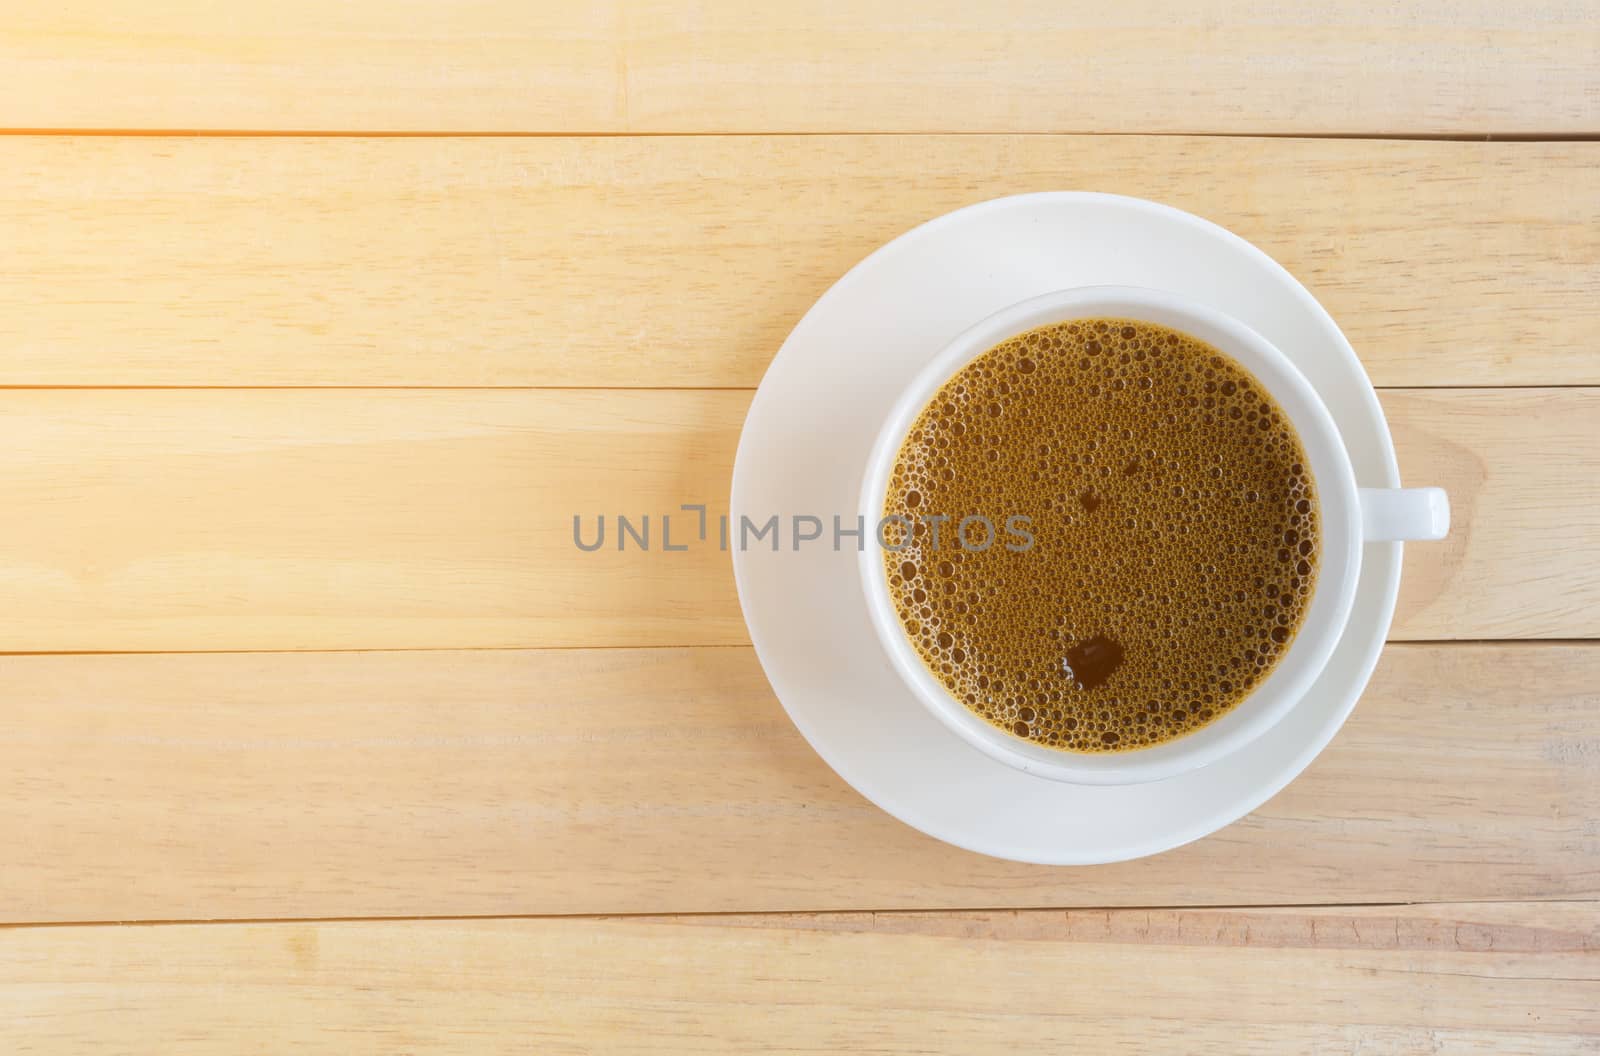 Cup of coffee on wood background.